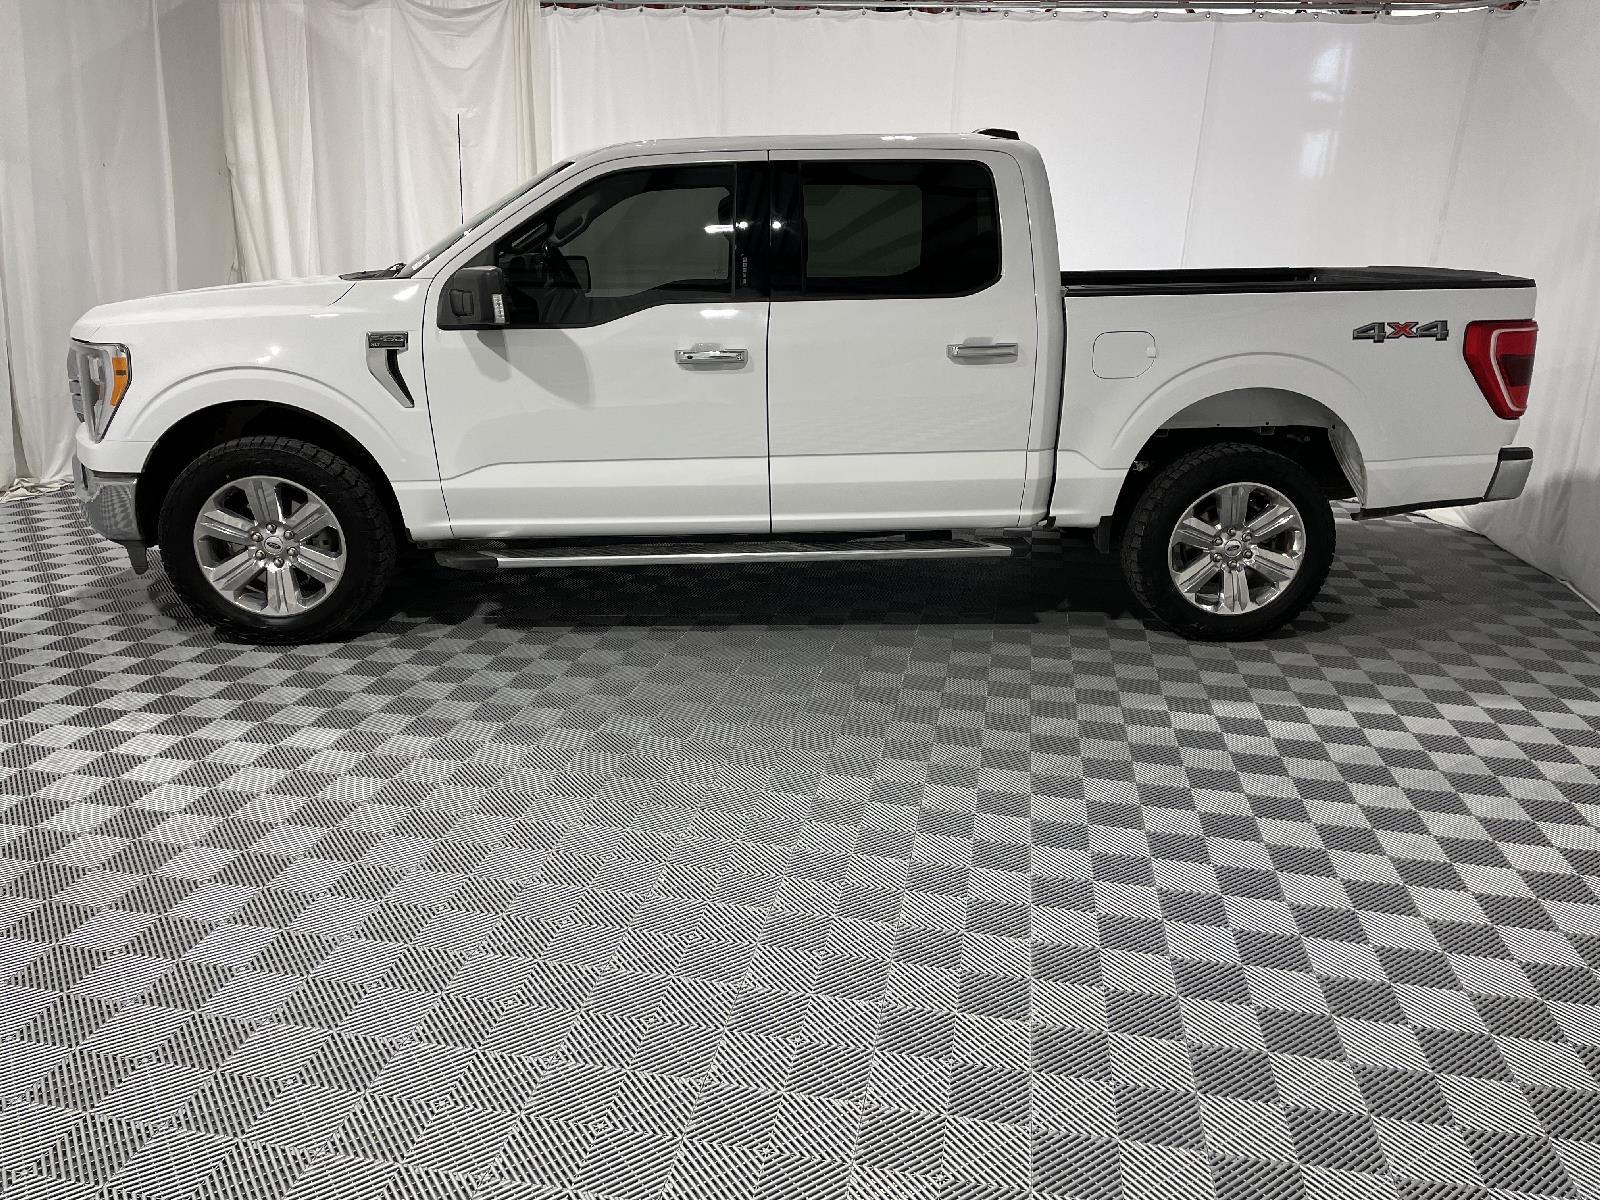 Used 2022 Ford F-150 XLT Crew Cab Truck for sale in St Joseph MO